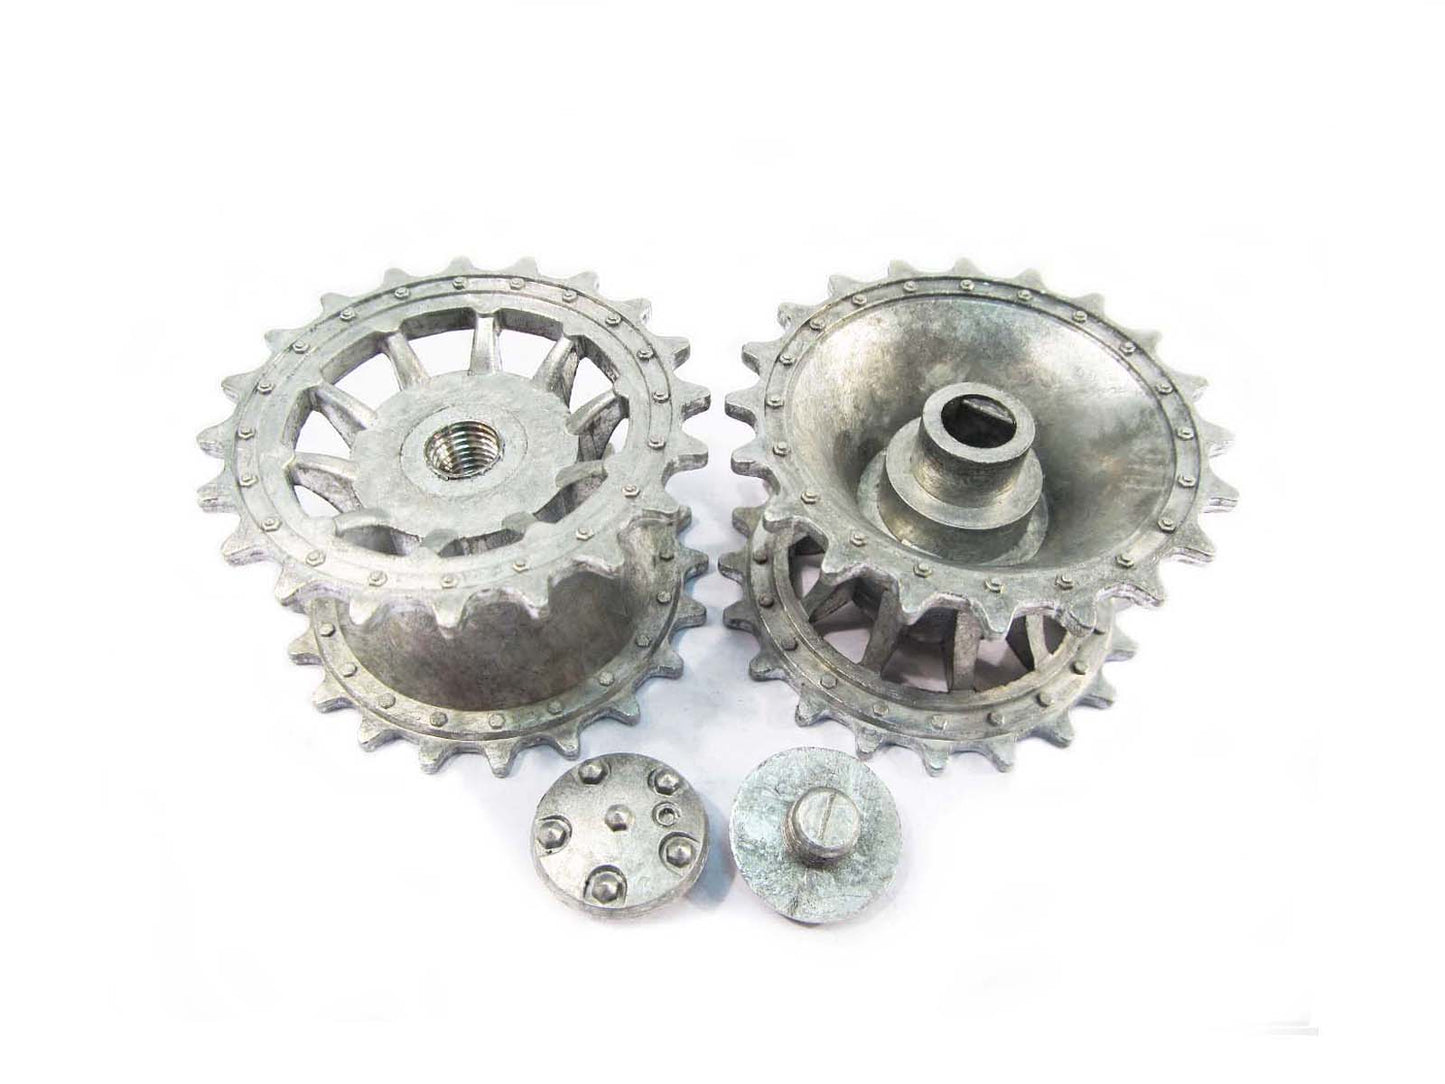 Mato 1/16 Metal Tracks Upper Hull Sprockets Idlers Road Wheels Bearing Turret Electronic BB/Infrared for German Tiger RC Tank